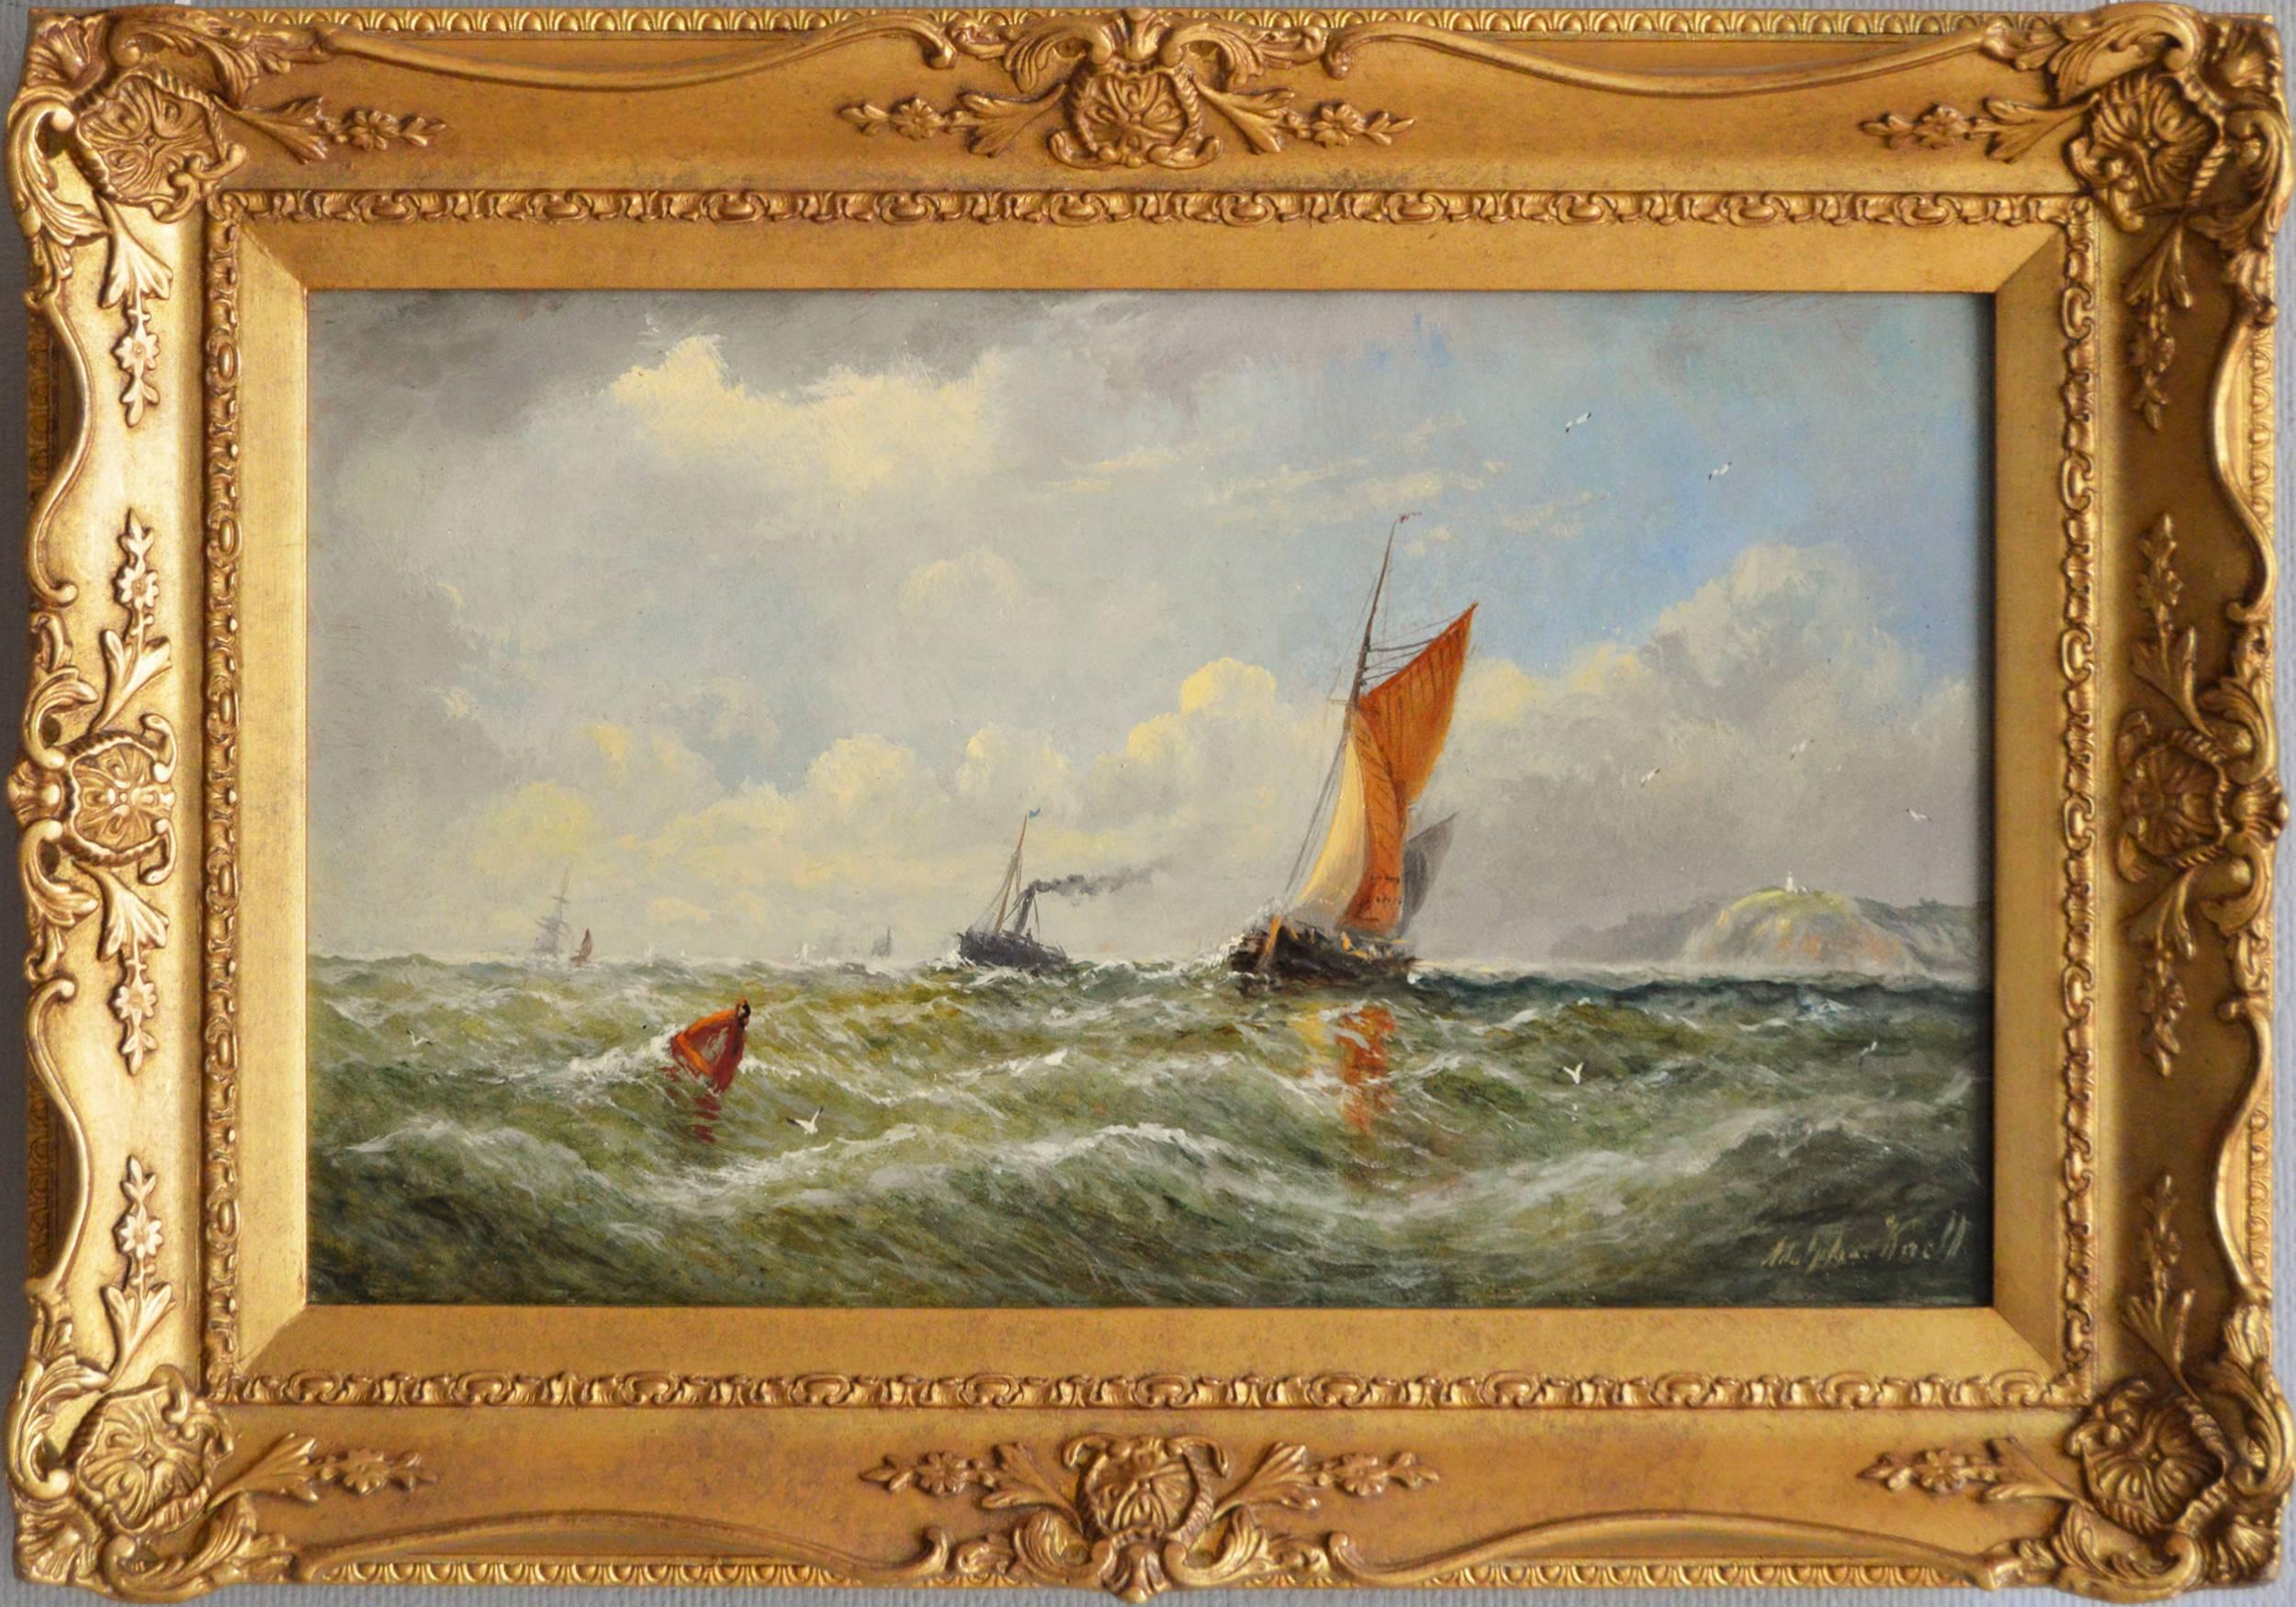 Adolphus Knell Landscape Painting - 19th Century marine scene with ships